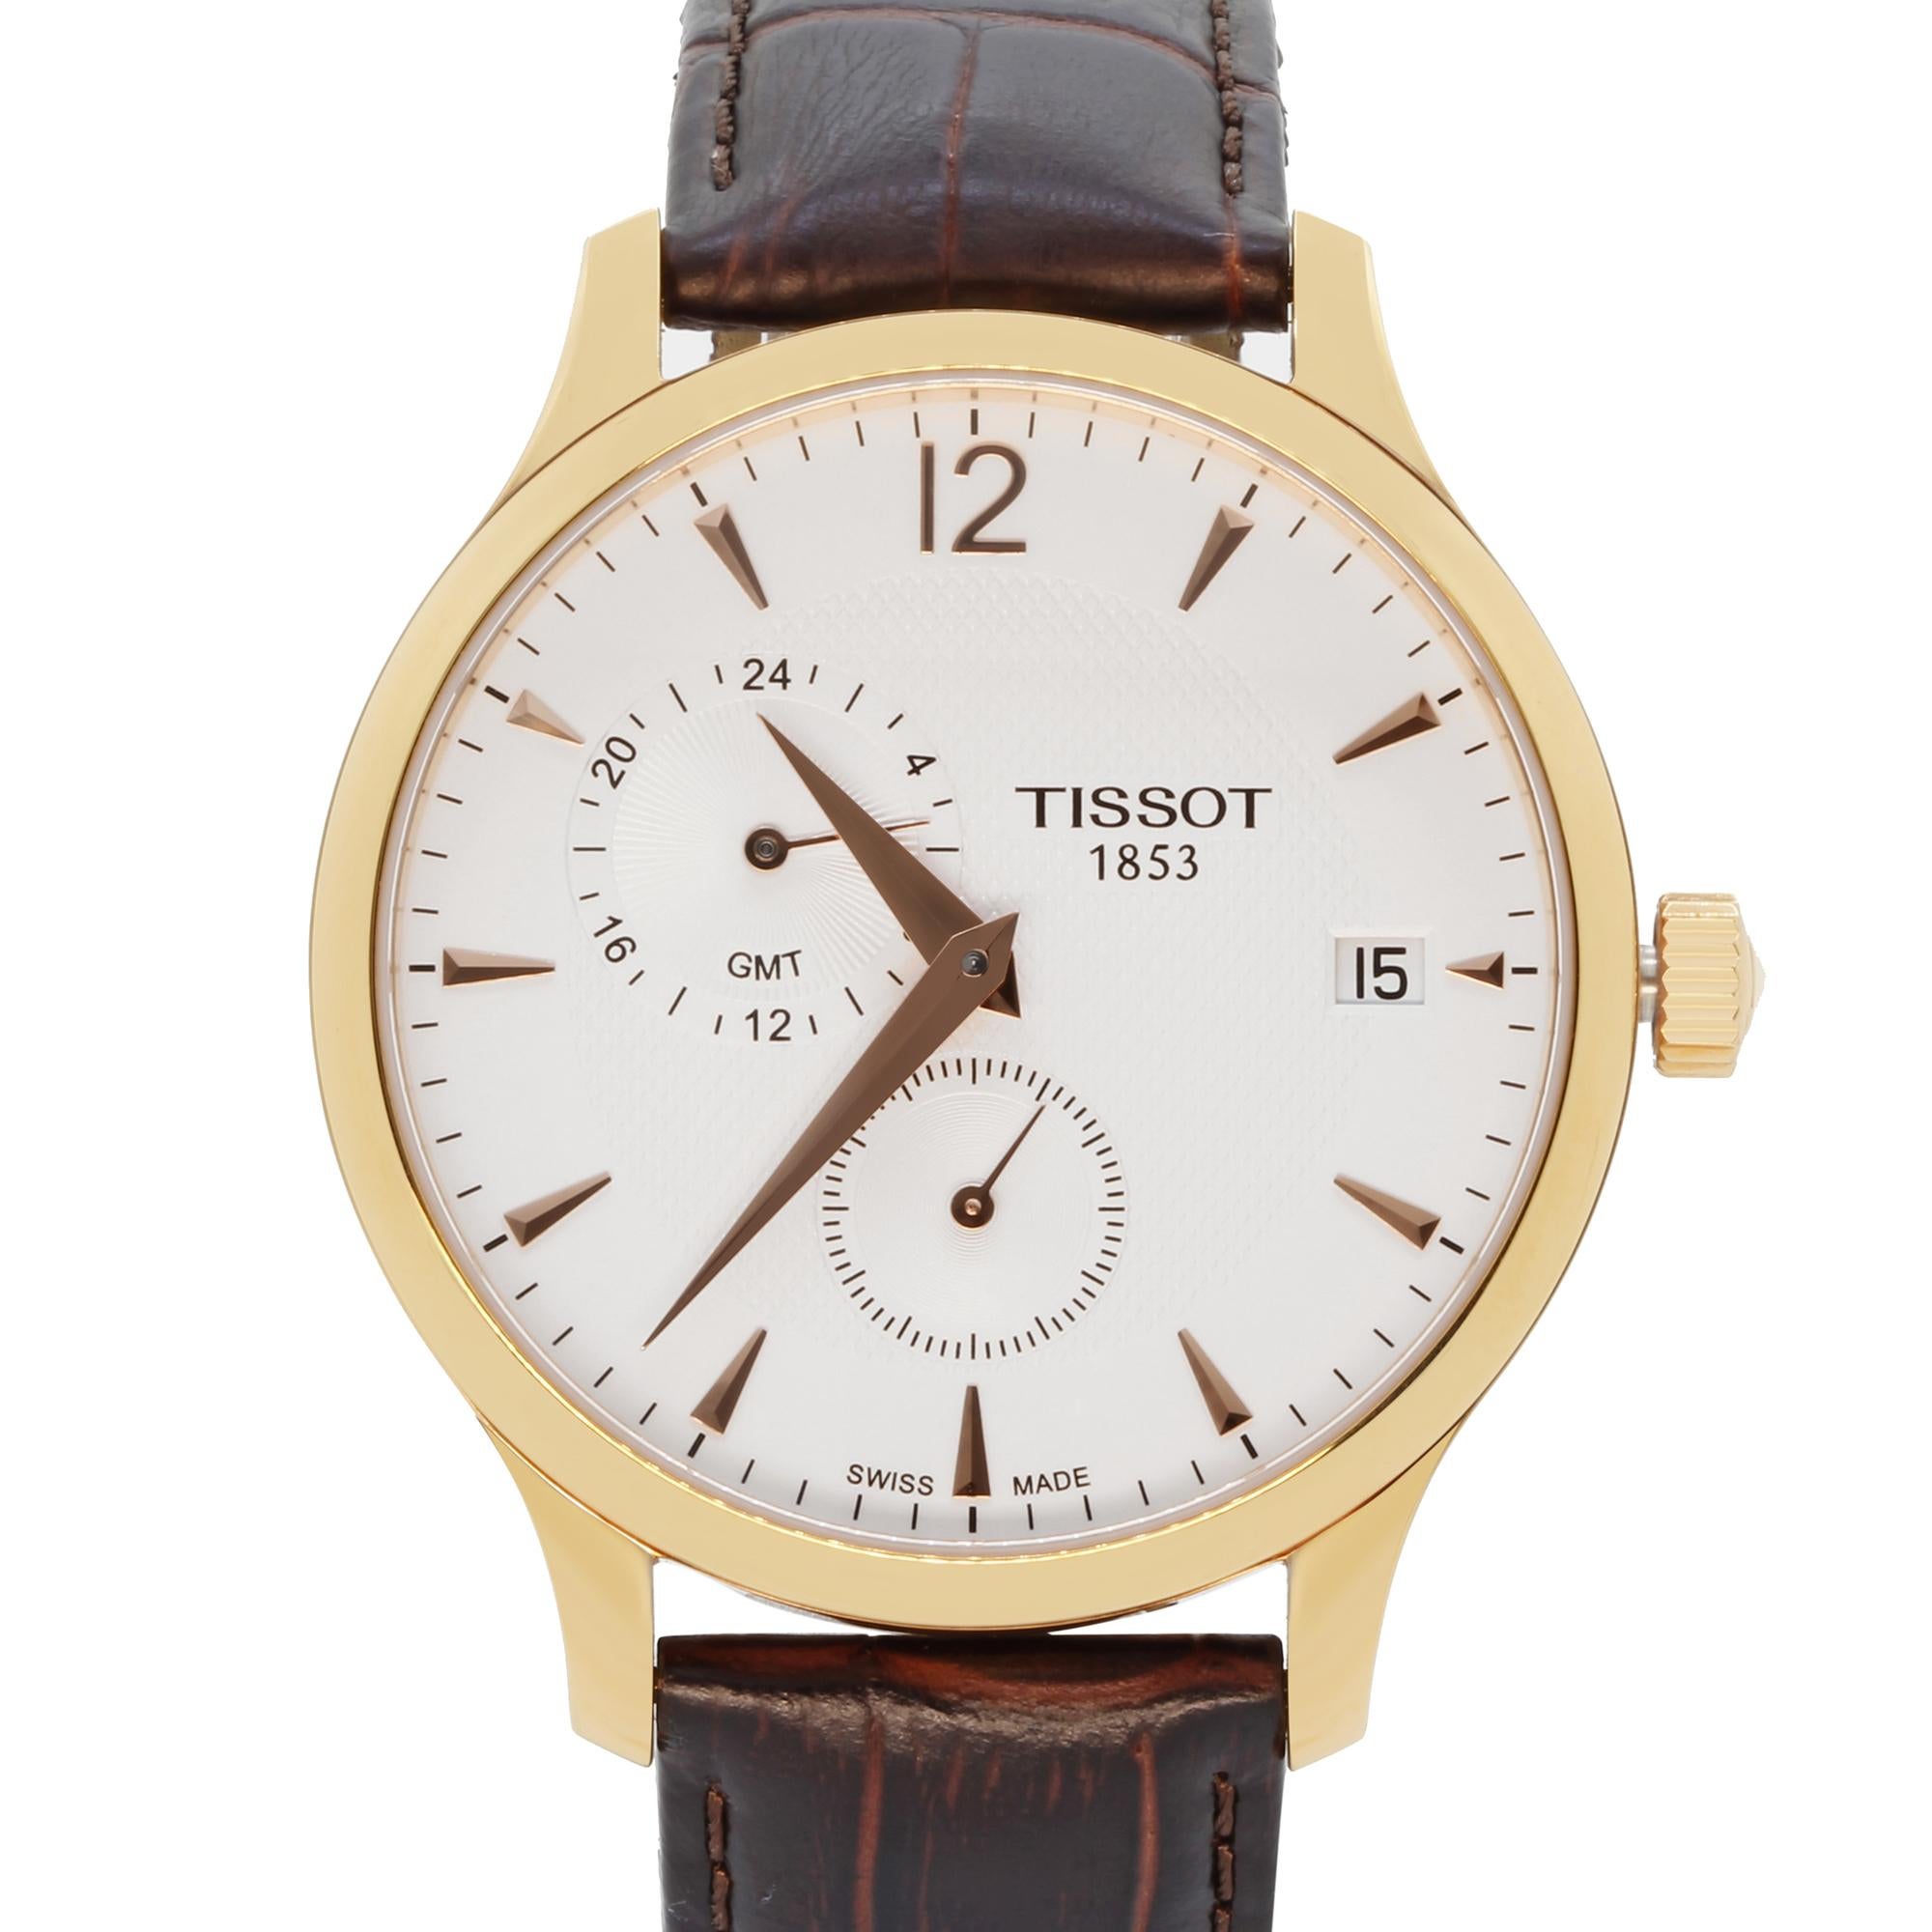 Preowned Tissot Tradition Steel Rose Gold-Tone White Dial Men Quartz Watch T063.639.36.037.00. The watch was never owned or owned but has some hairline scratches on the case and some insignificant dry cracks on the inner side of the strap due to the